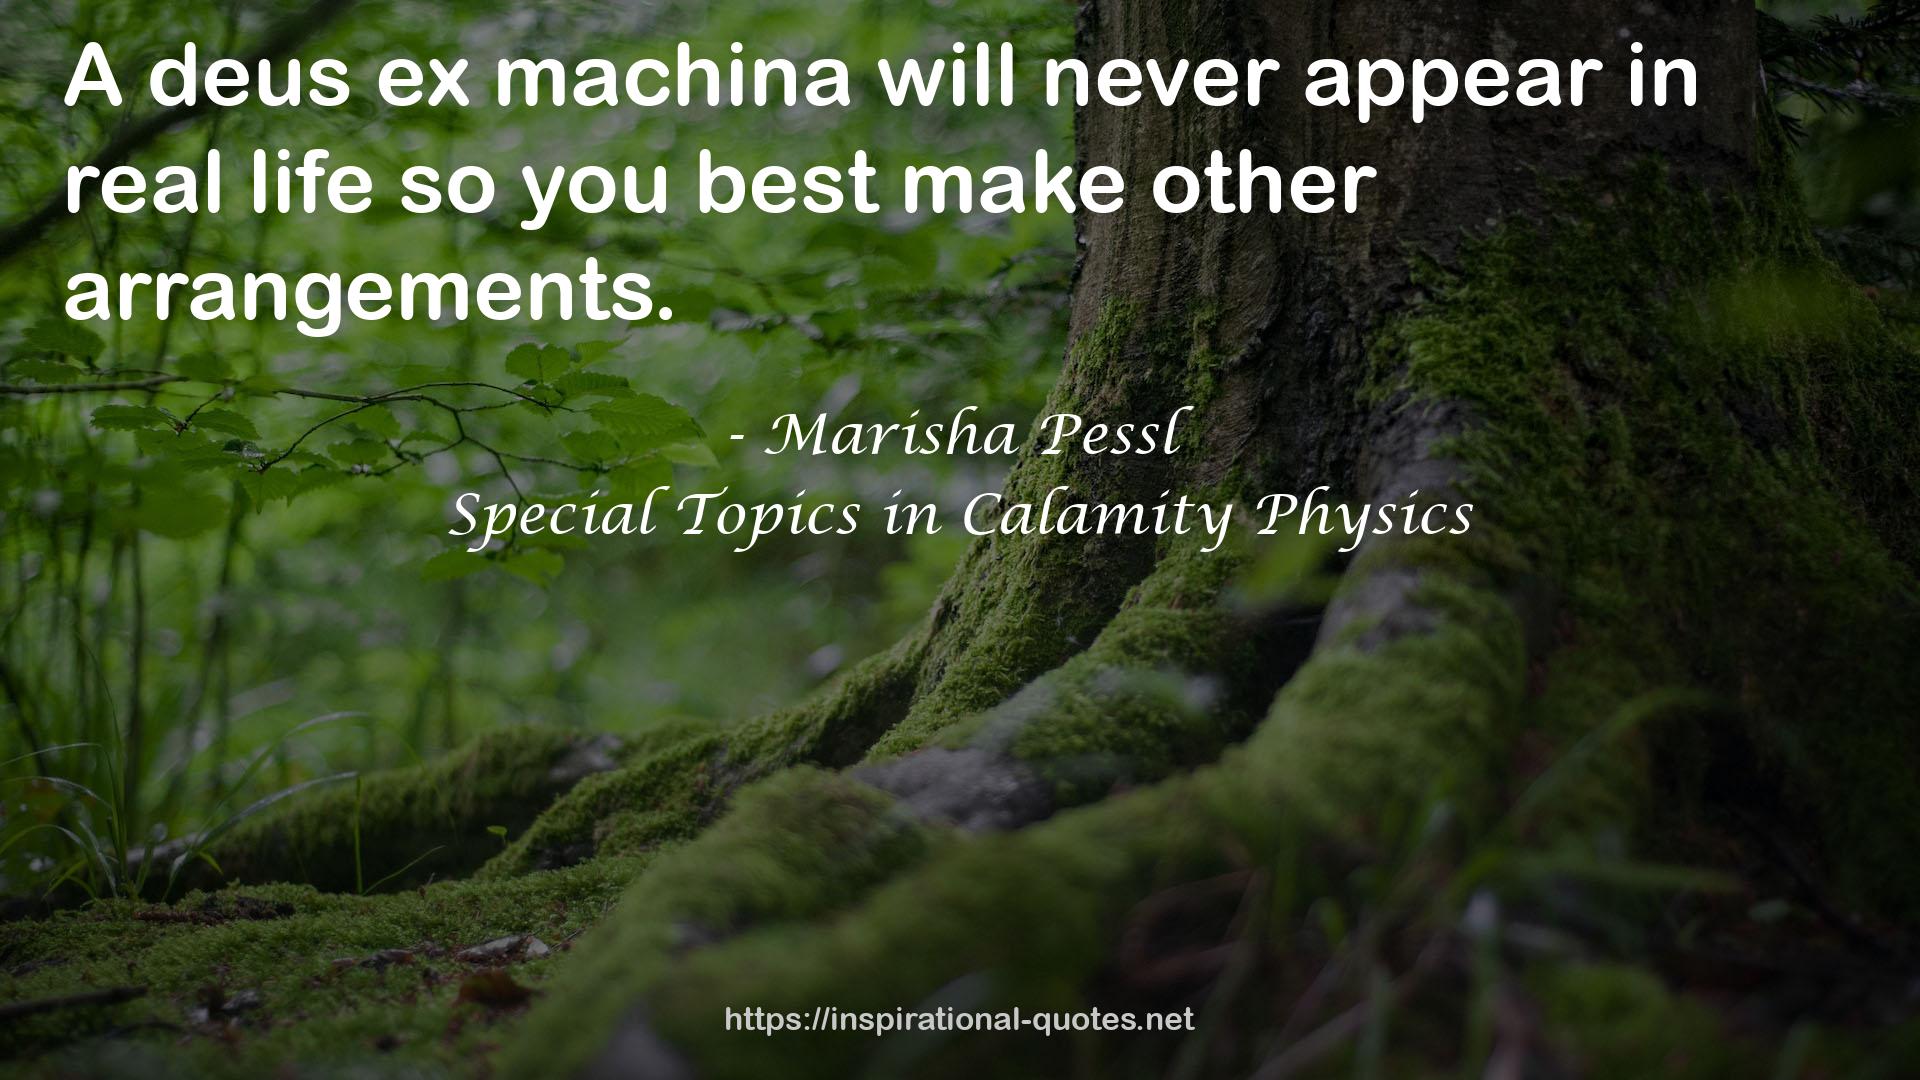 Special Topics in Calamity Physics QUOTES